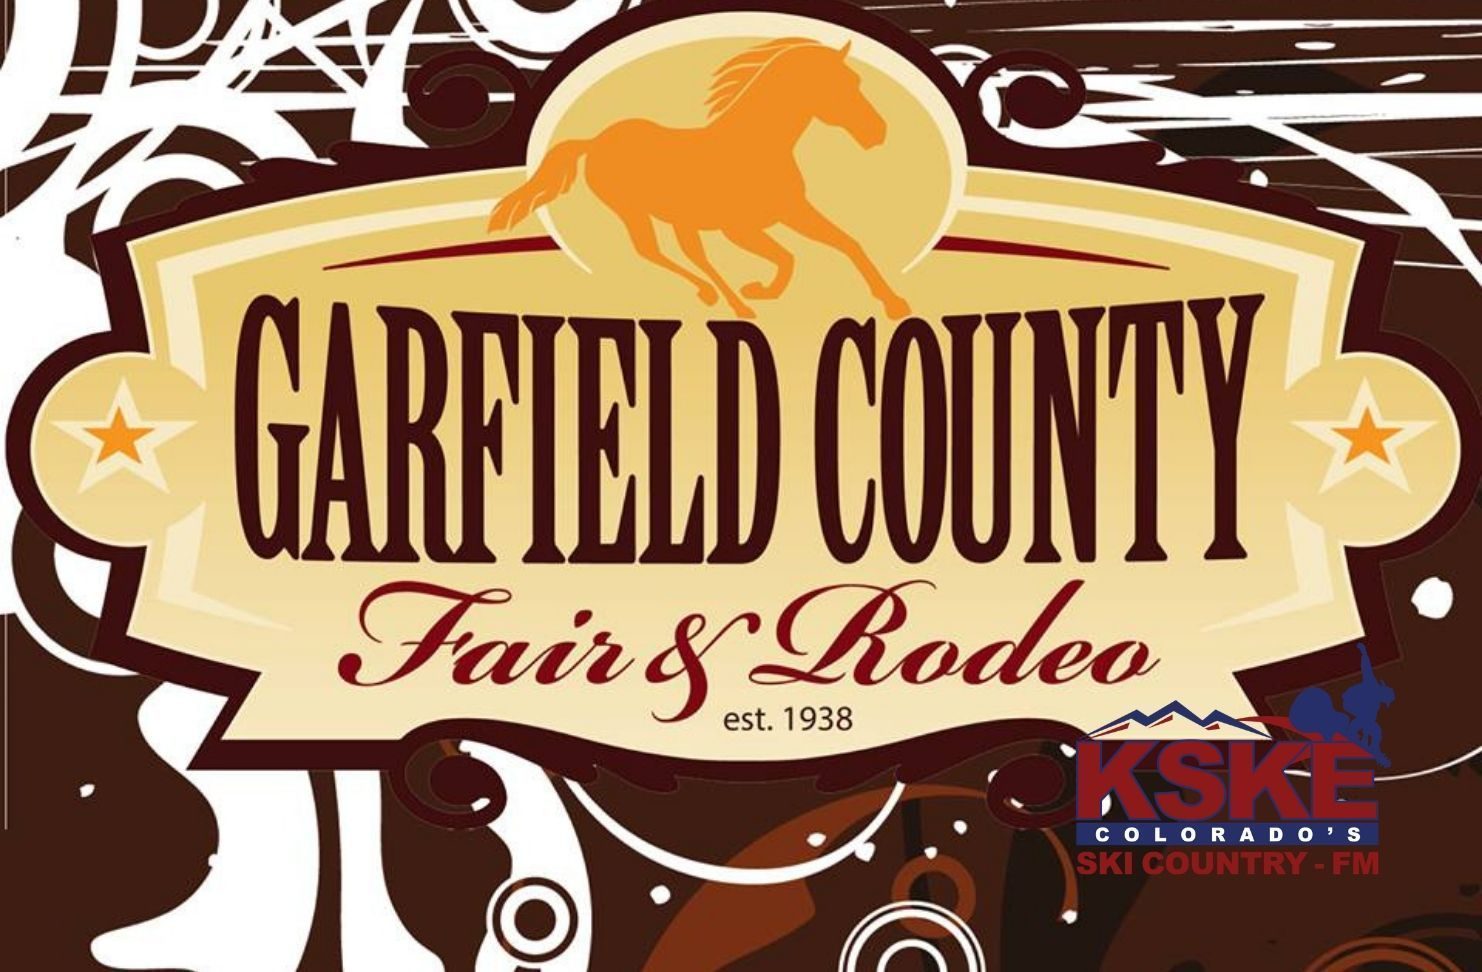 GARFIELD COUNTY FAIR AND RODEO KSKE Ski Country